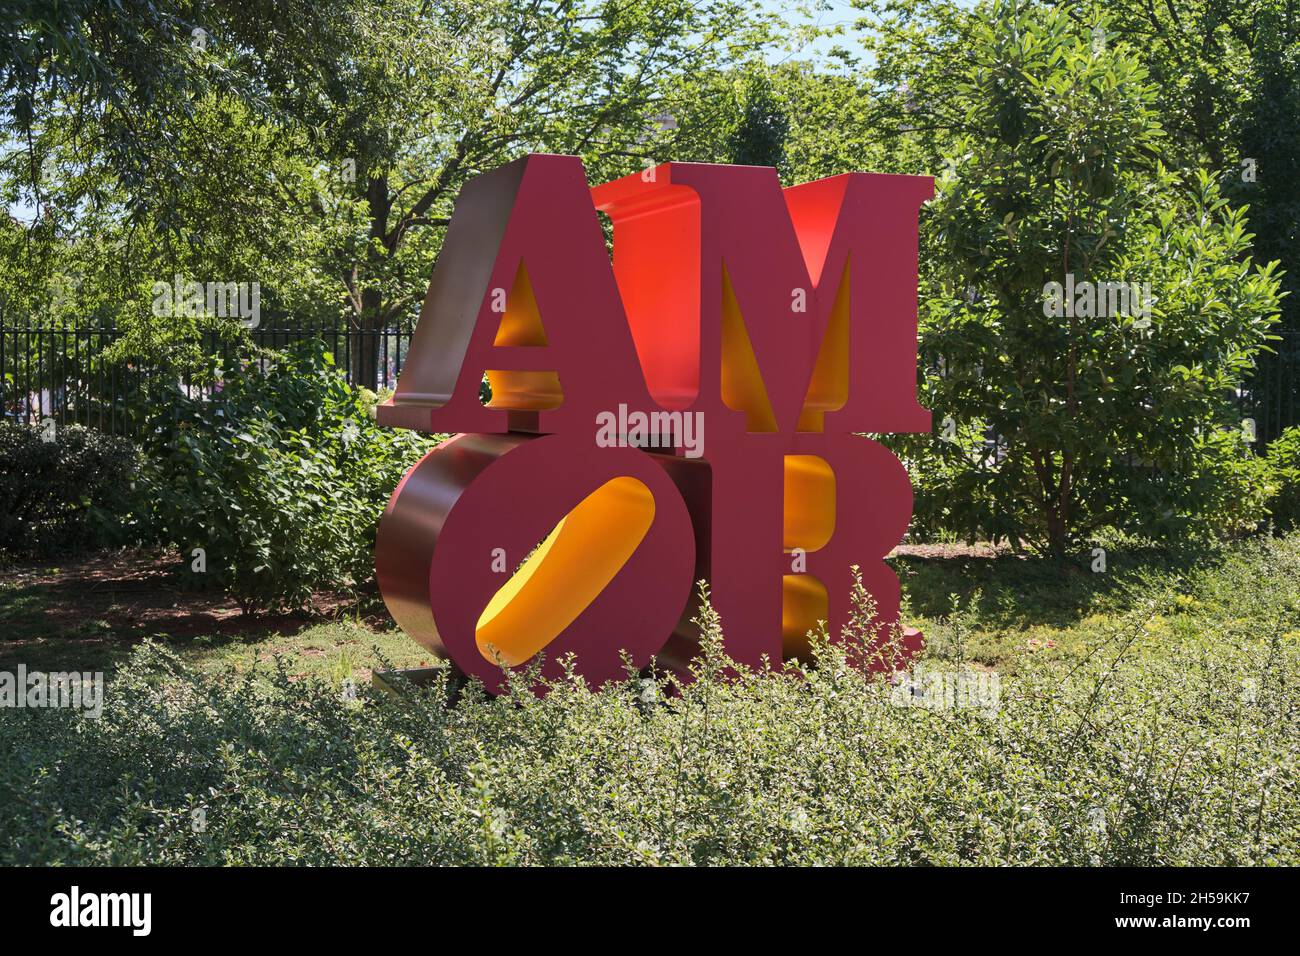 The Robert Indiana sculpture, Amor (Love), the classic text, letter work. At the National Gallery of Art sculpture garden in Washington DC. Stock Photo